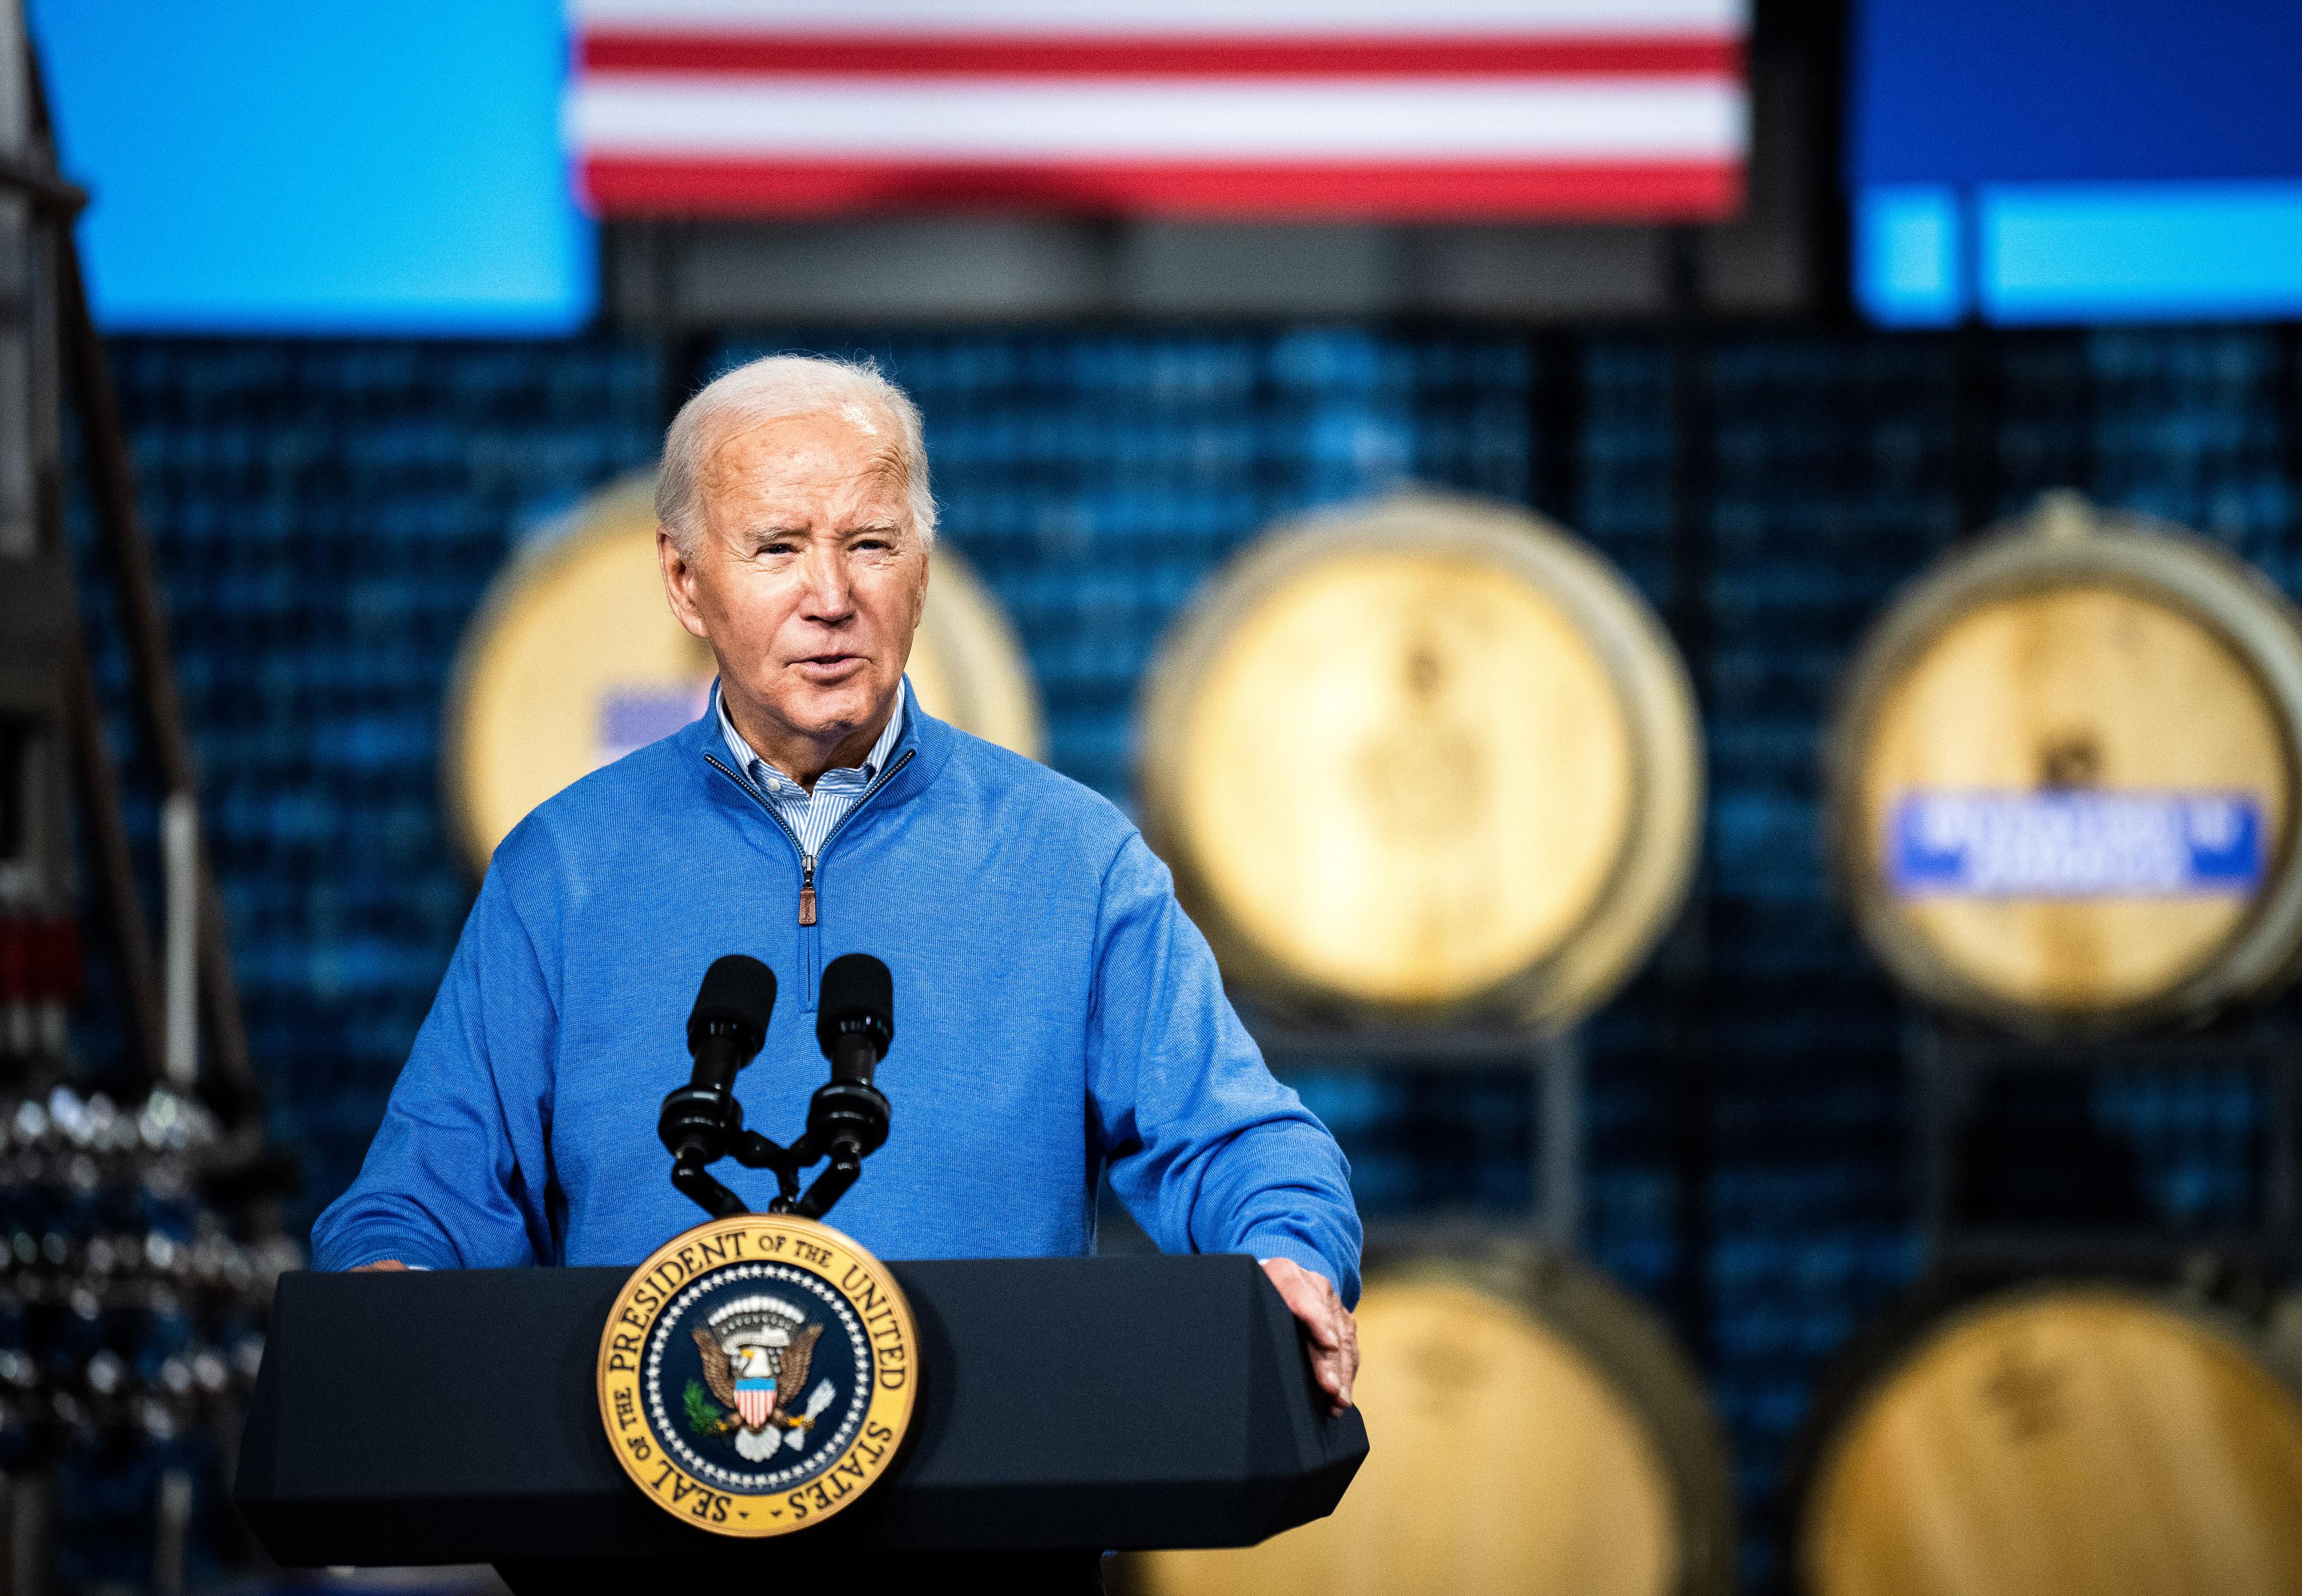 Classified Documents Relating to Ukraine Found in Biden’s Office, Special Counsel Reveals